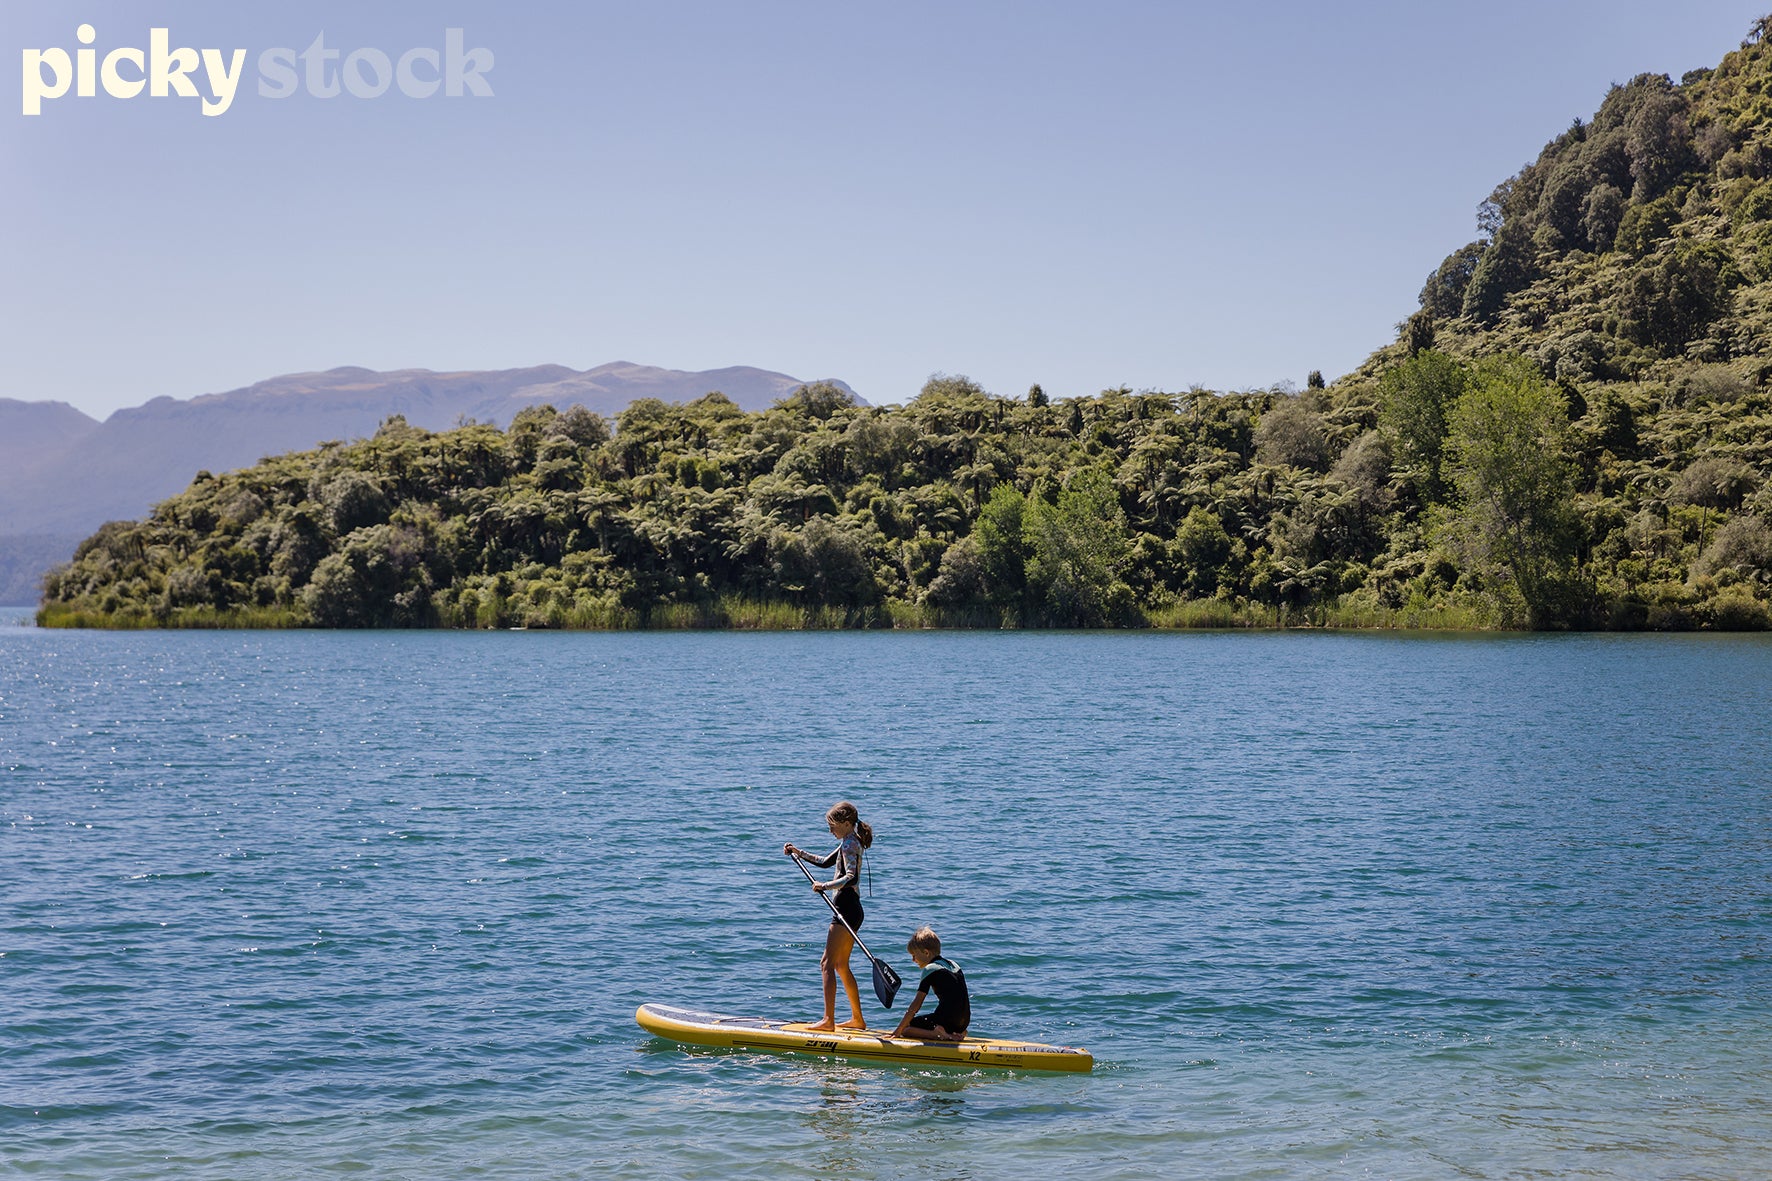 Two small kids on oner yellow stand up paddle-board. Small girl with pony tail in rash shirt is paddling. Small boy behind her. Lake is blue. Lush green cliffs surrounding the water. Blue sky, summers day.